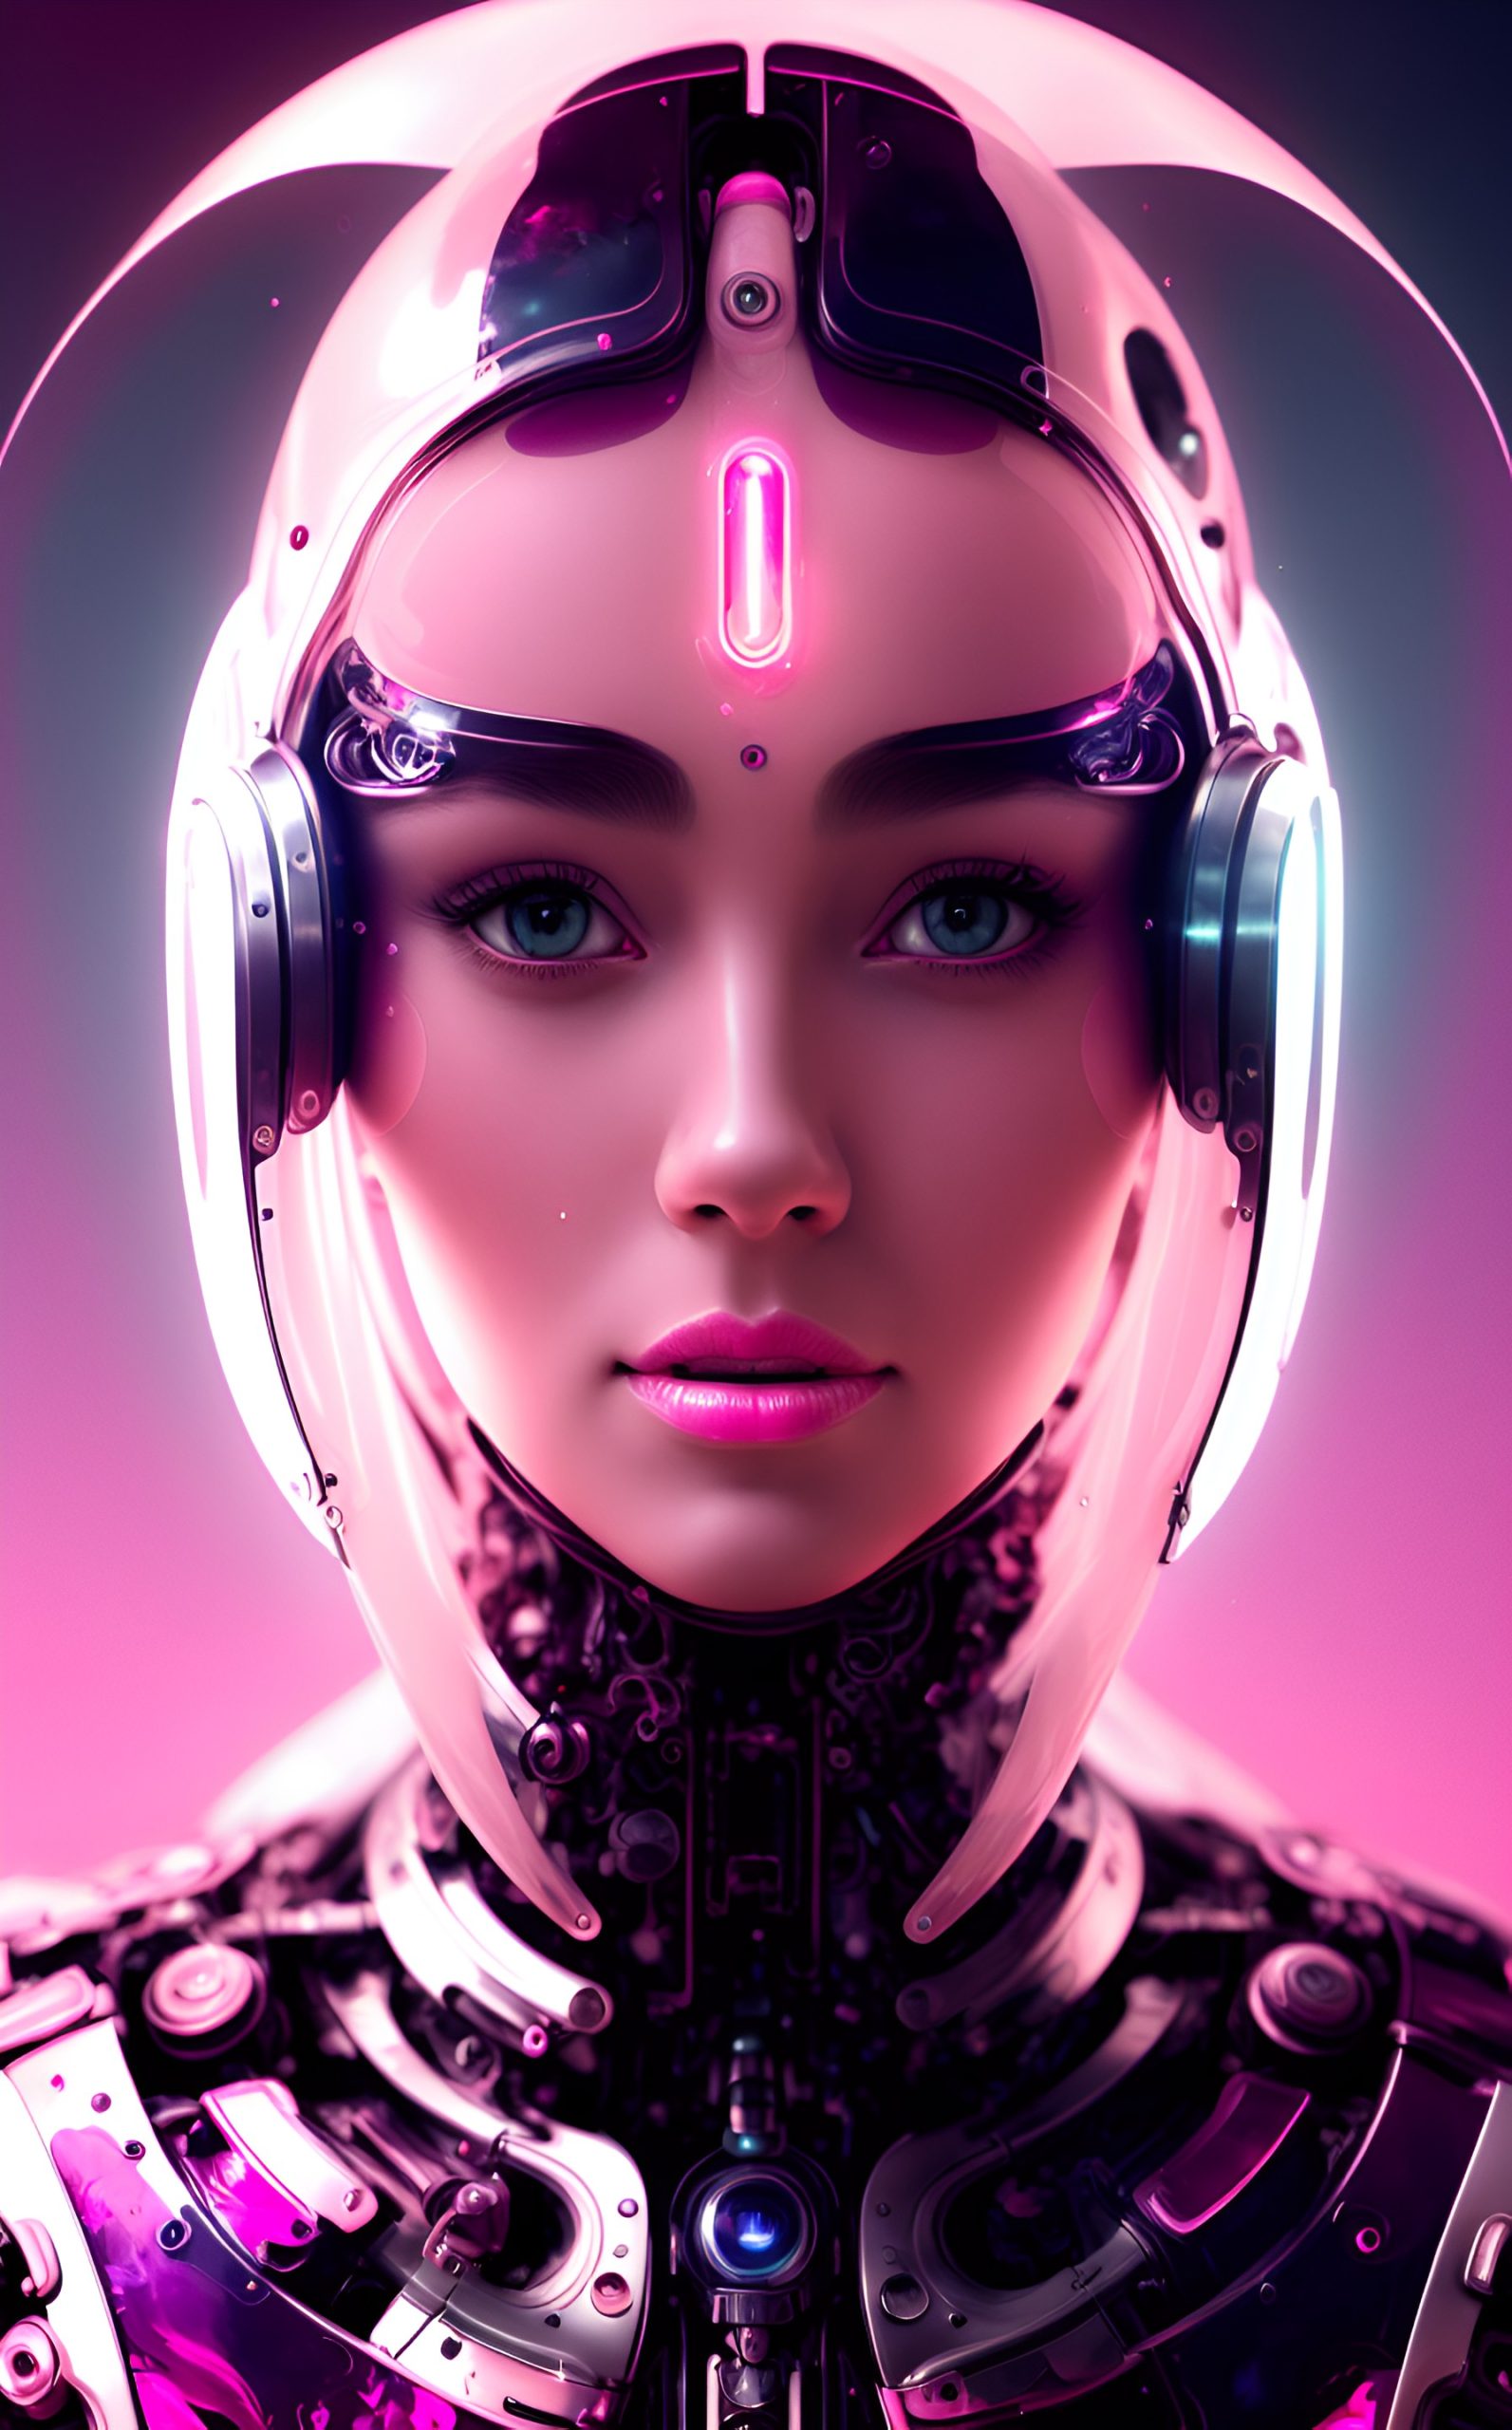 Default beautiful woman a cyborg woman 28years old pink gel lighting 0 c004827f 571d 4514 a626 7f4a94863b06 1 scaled